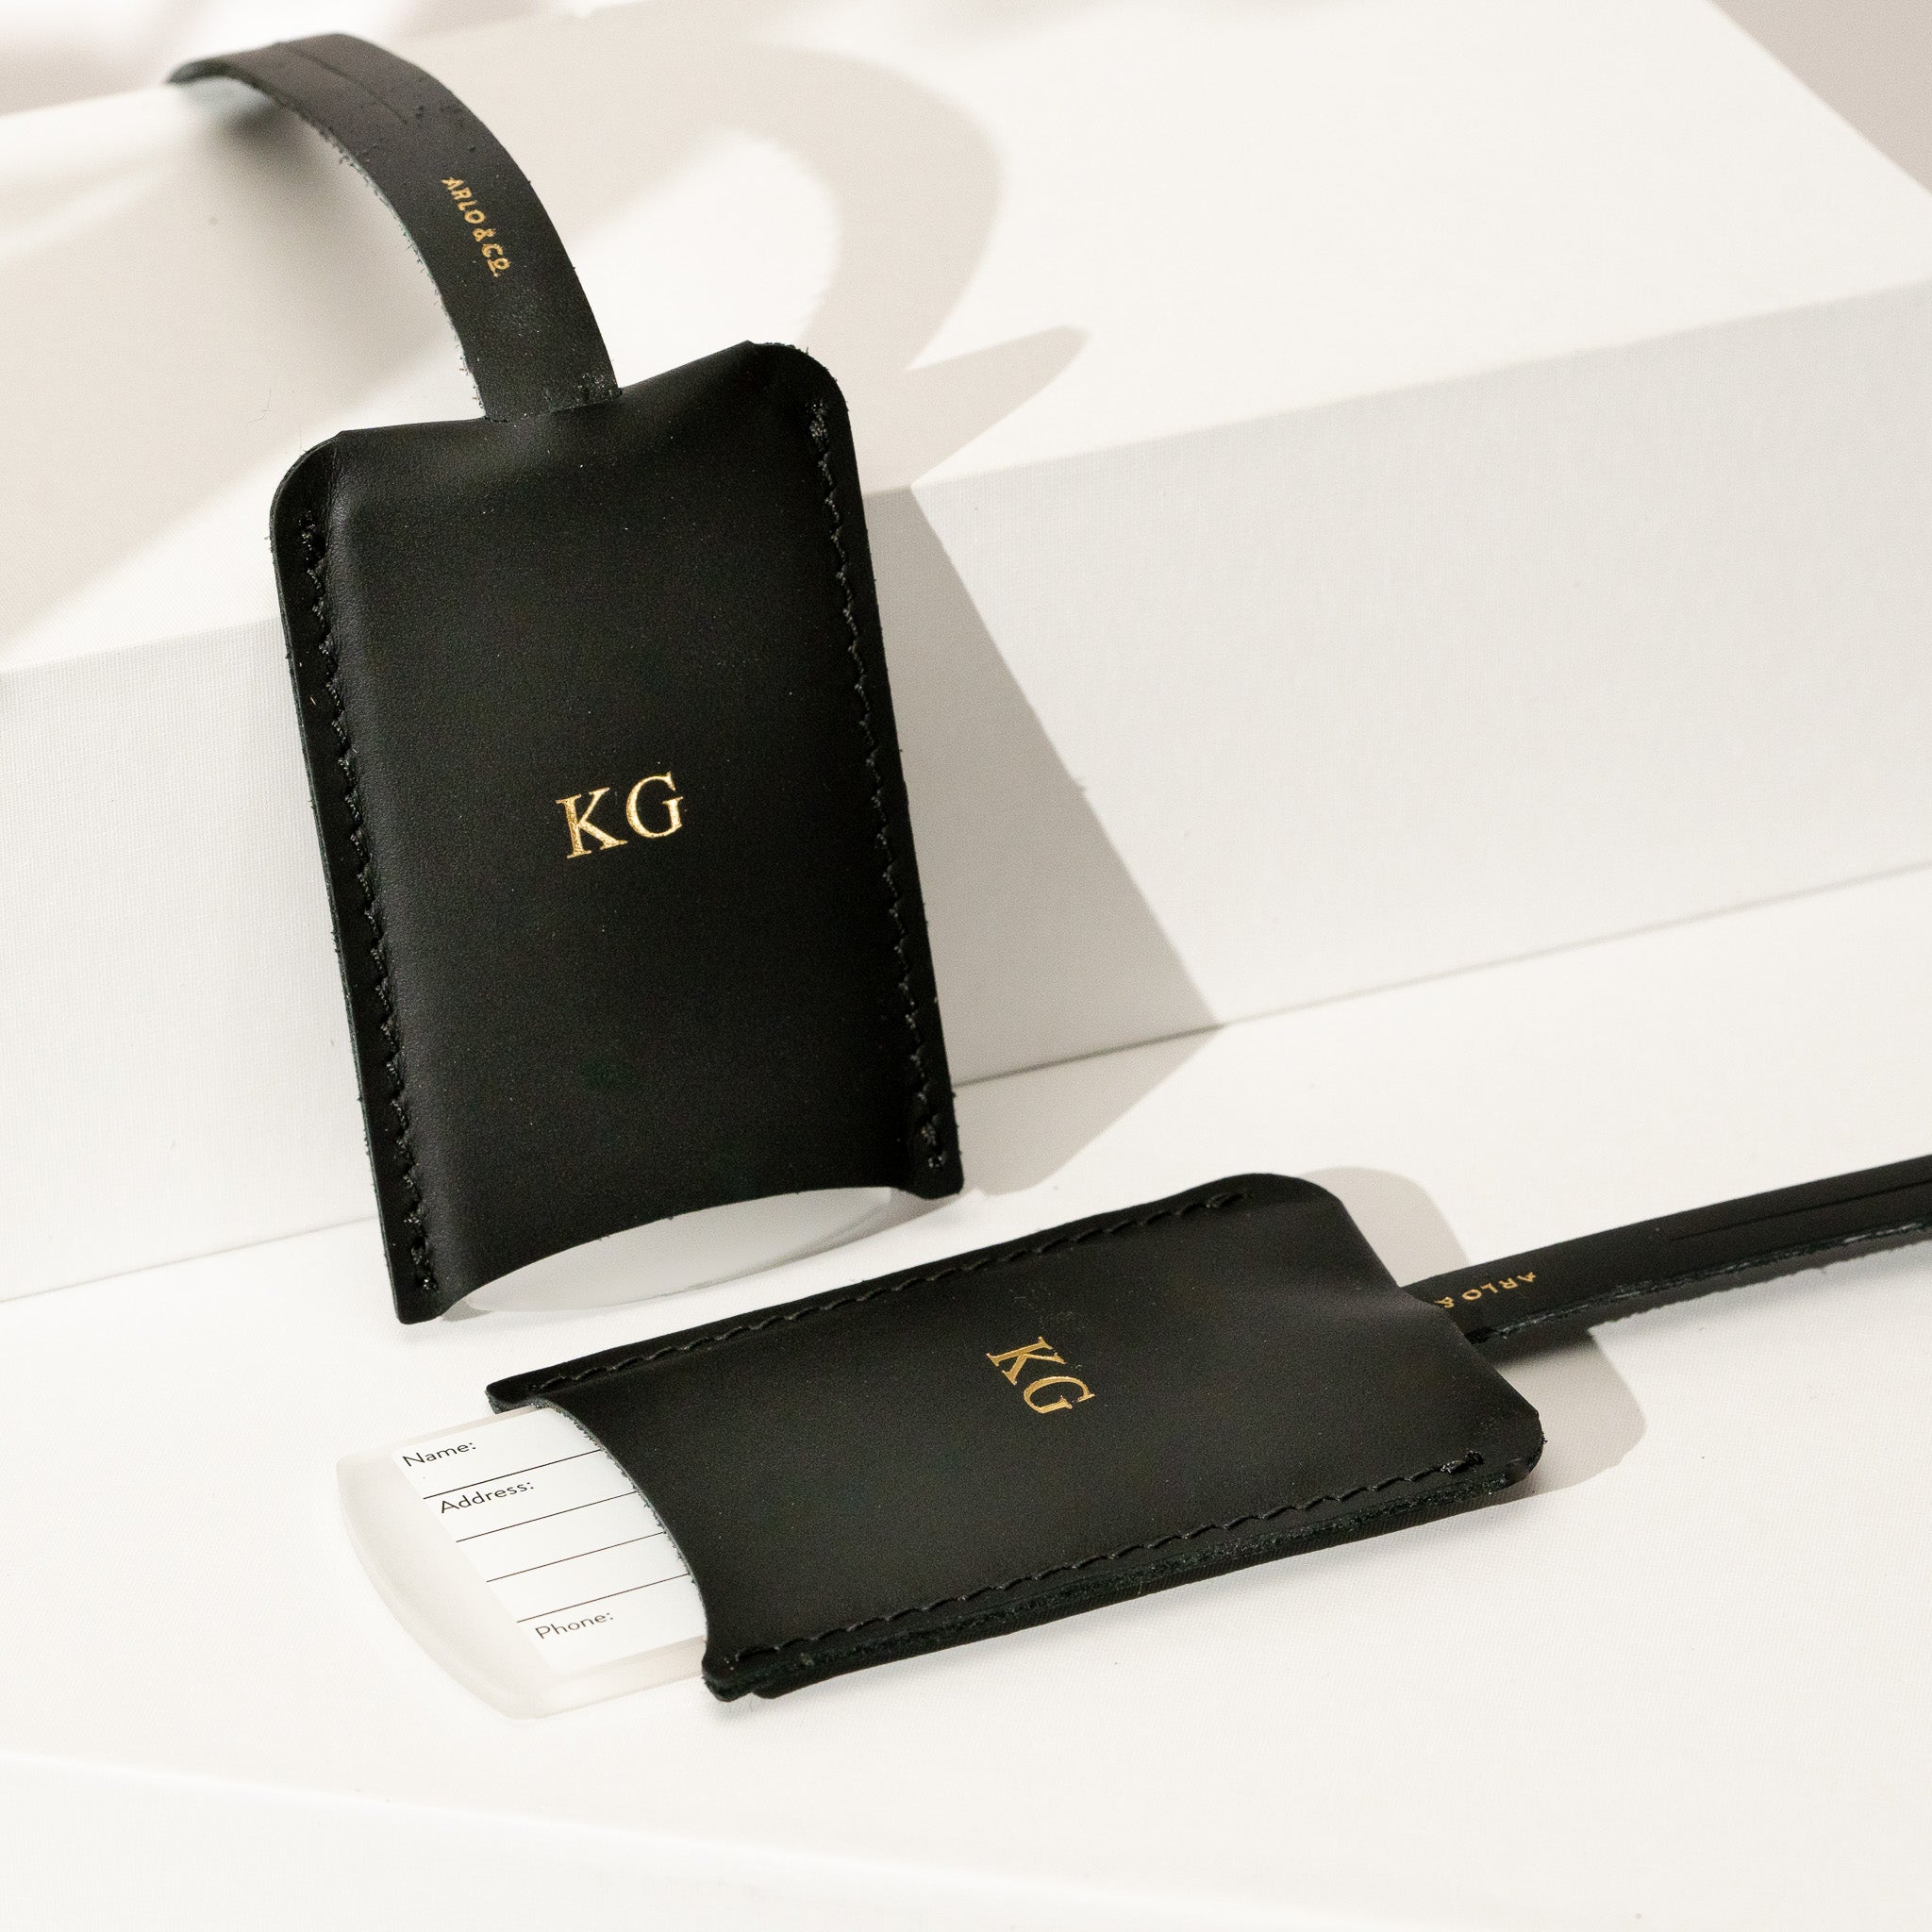 Personalised Leather Luggage Tag - Arlo and Co